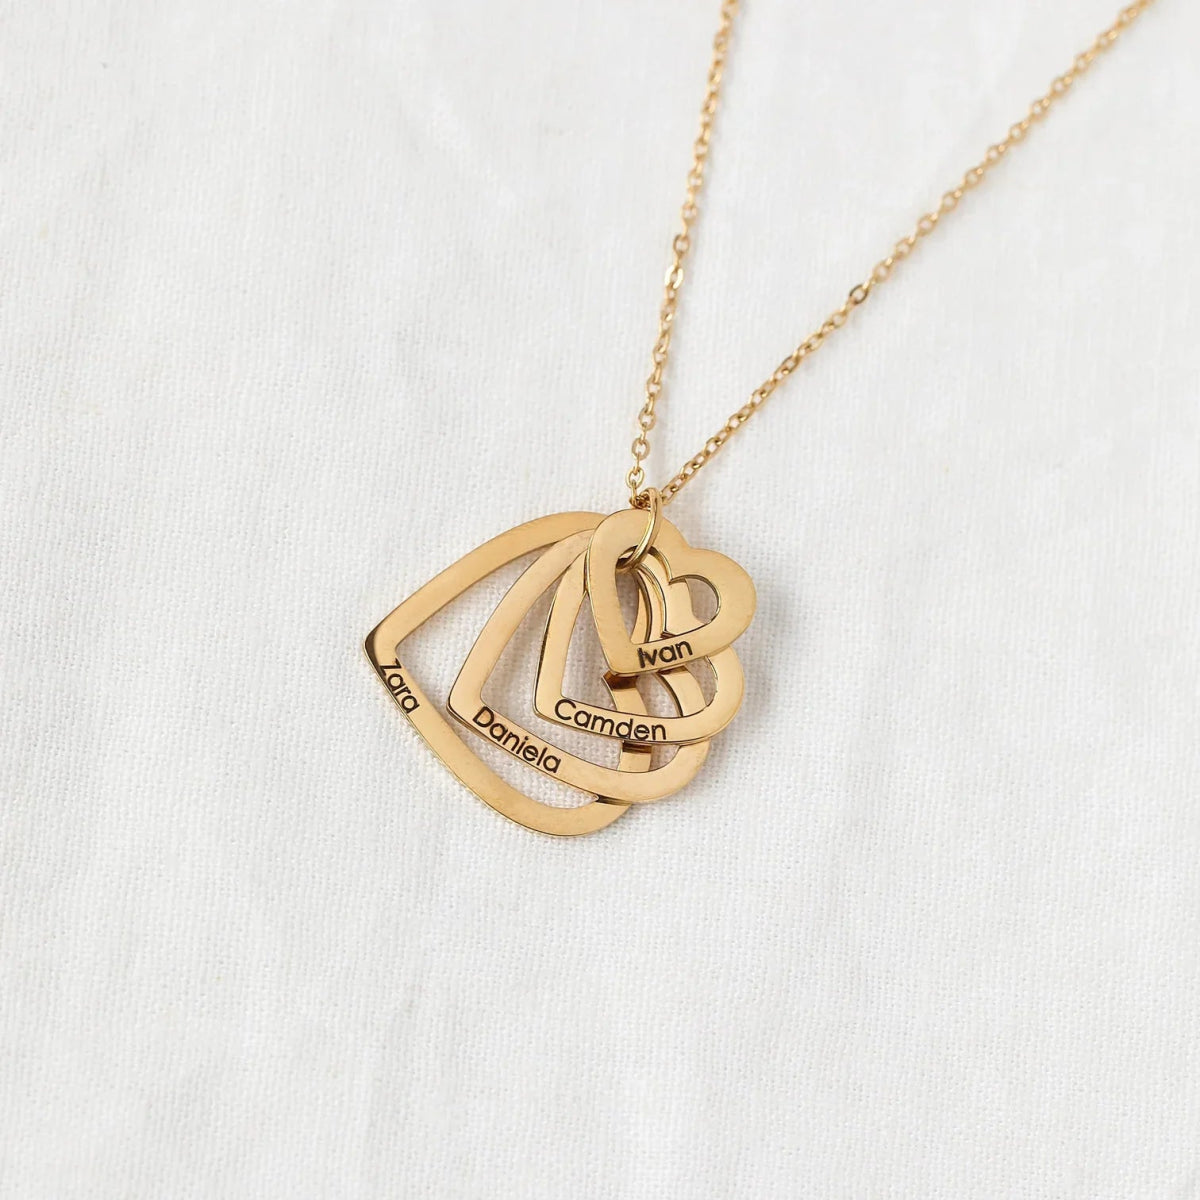 Stacked Hearts Name Necklace in 18K Gold Plating - glwave